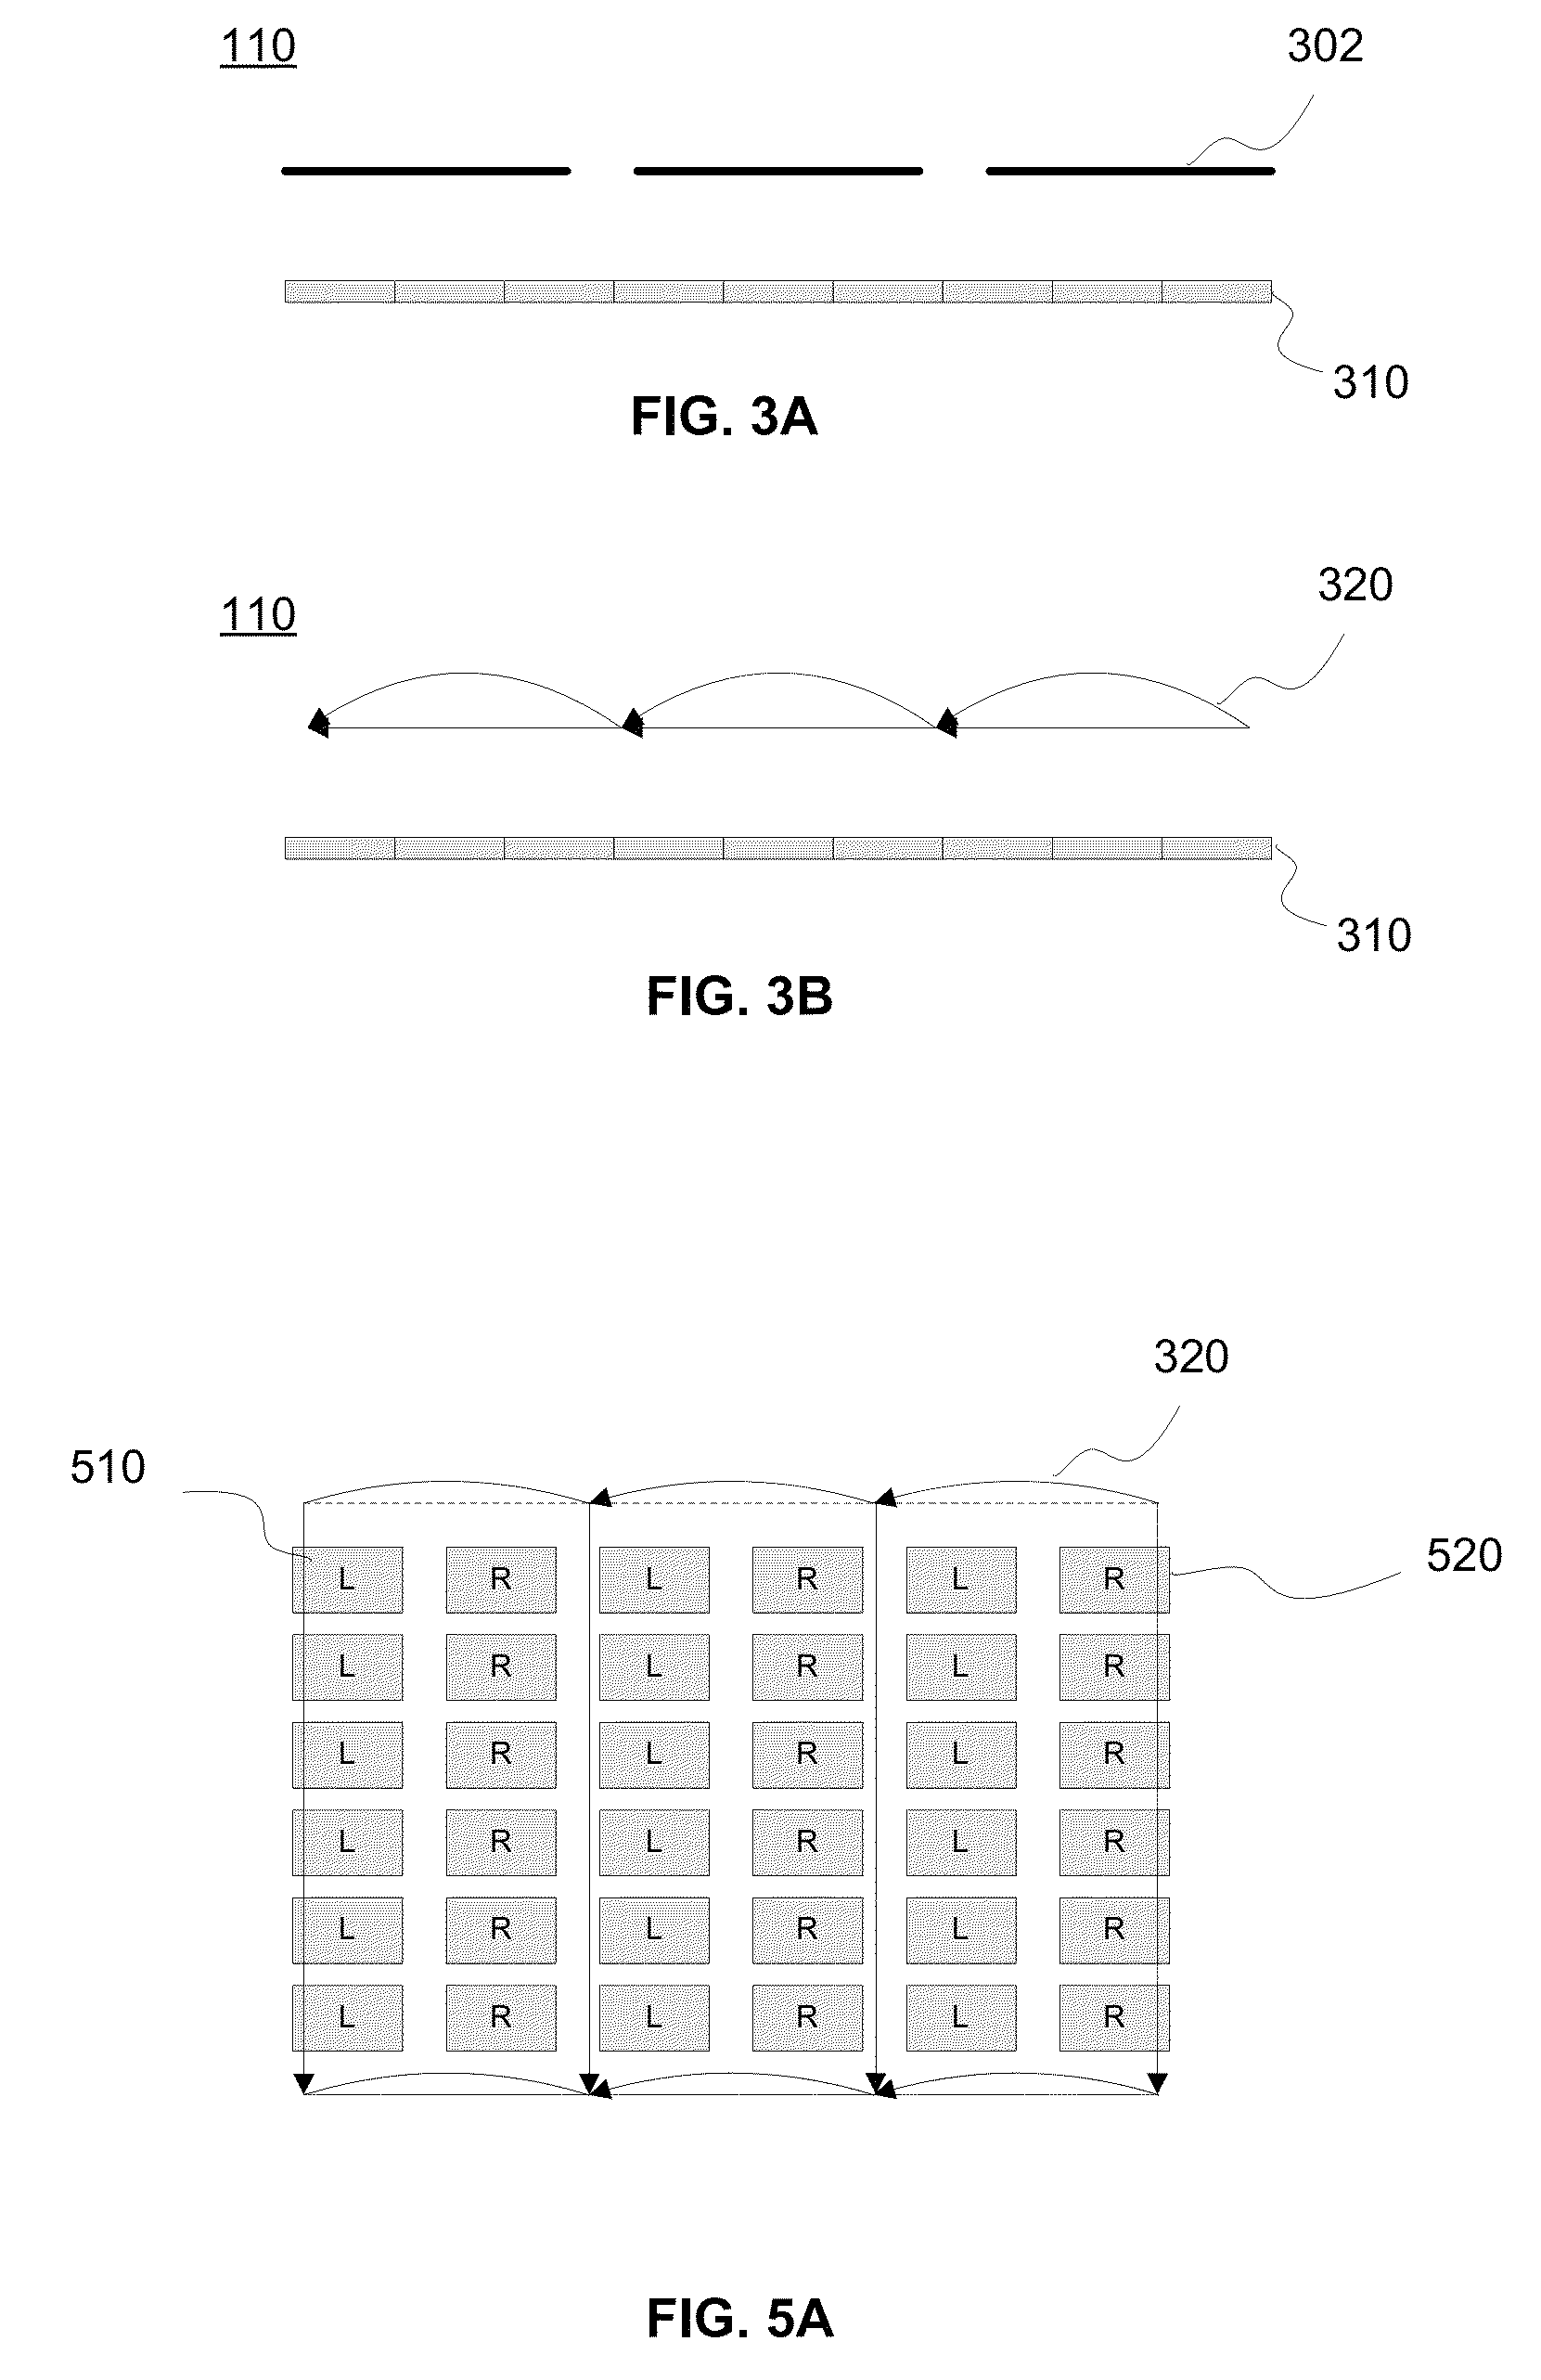 Autostereoscopic display method and system